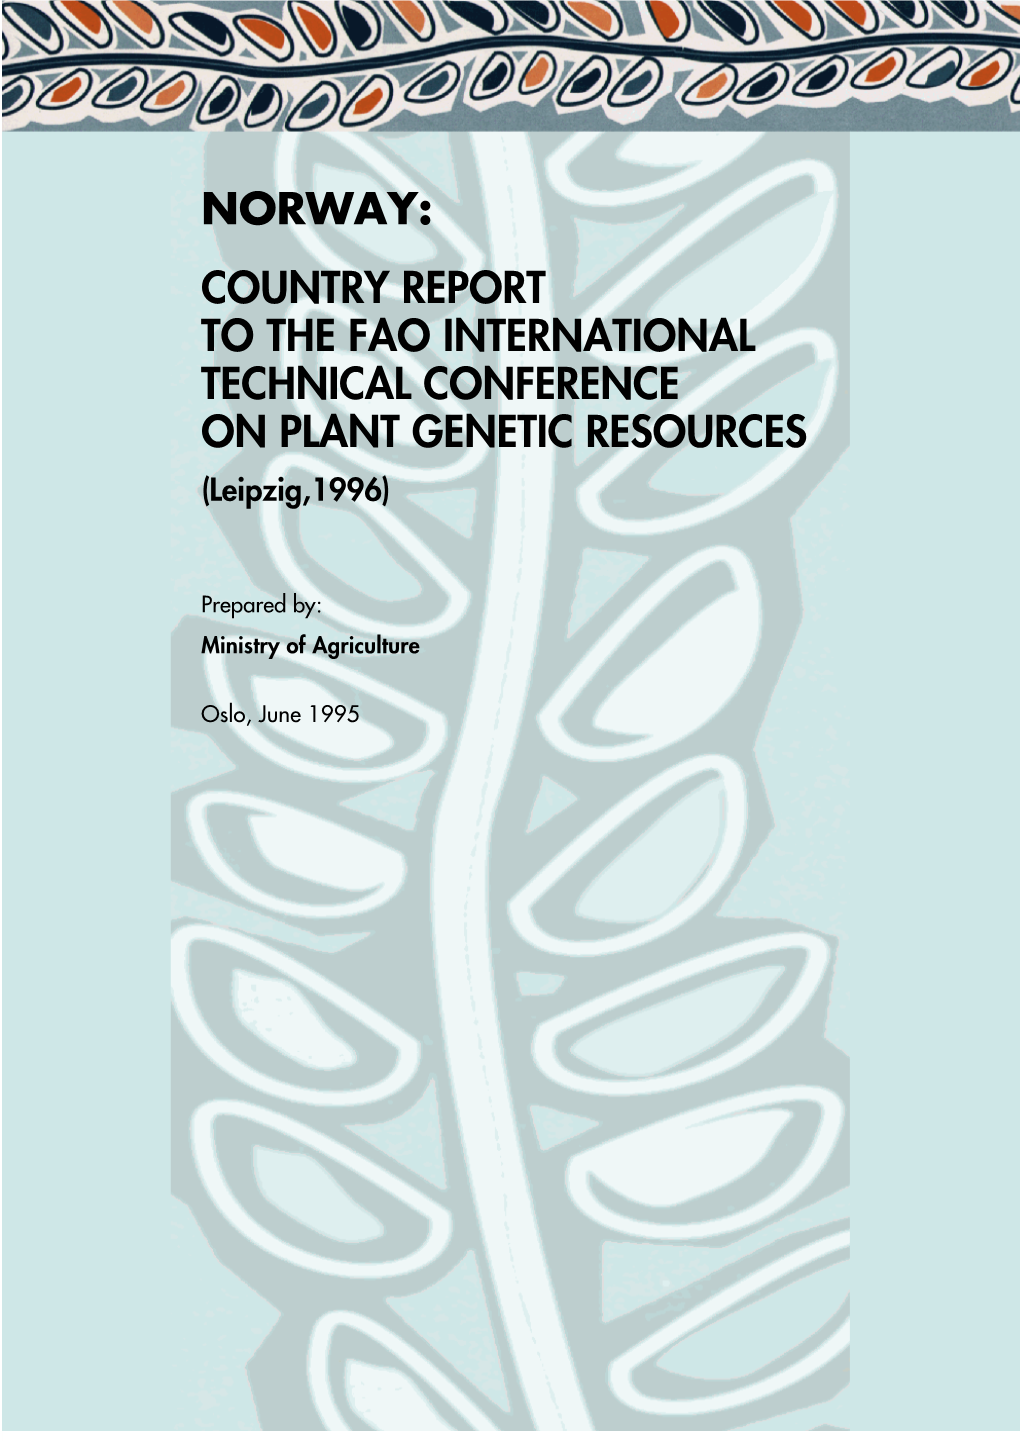 NORWAY: COUNTRY REPORT to the FAO INTERNATIONAL TECHNICAL CONFERENCE on PLANT GENETIC RESOURCES (Leipzig,1996)